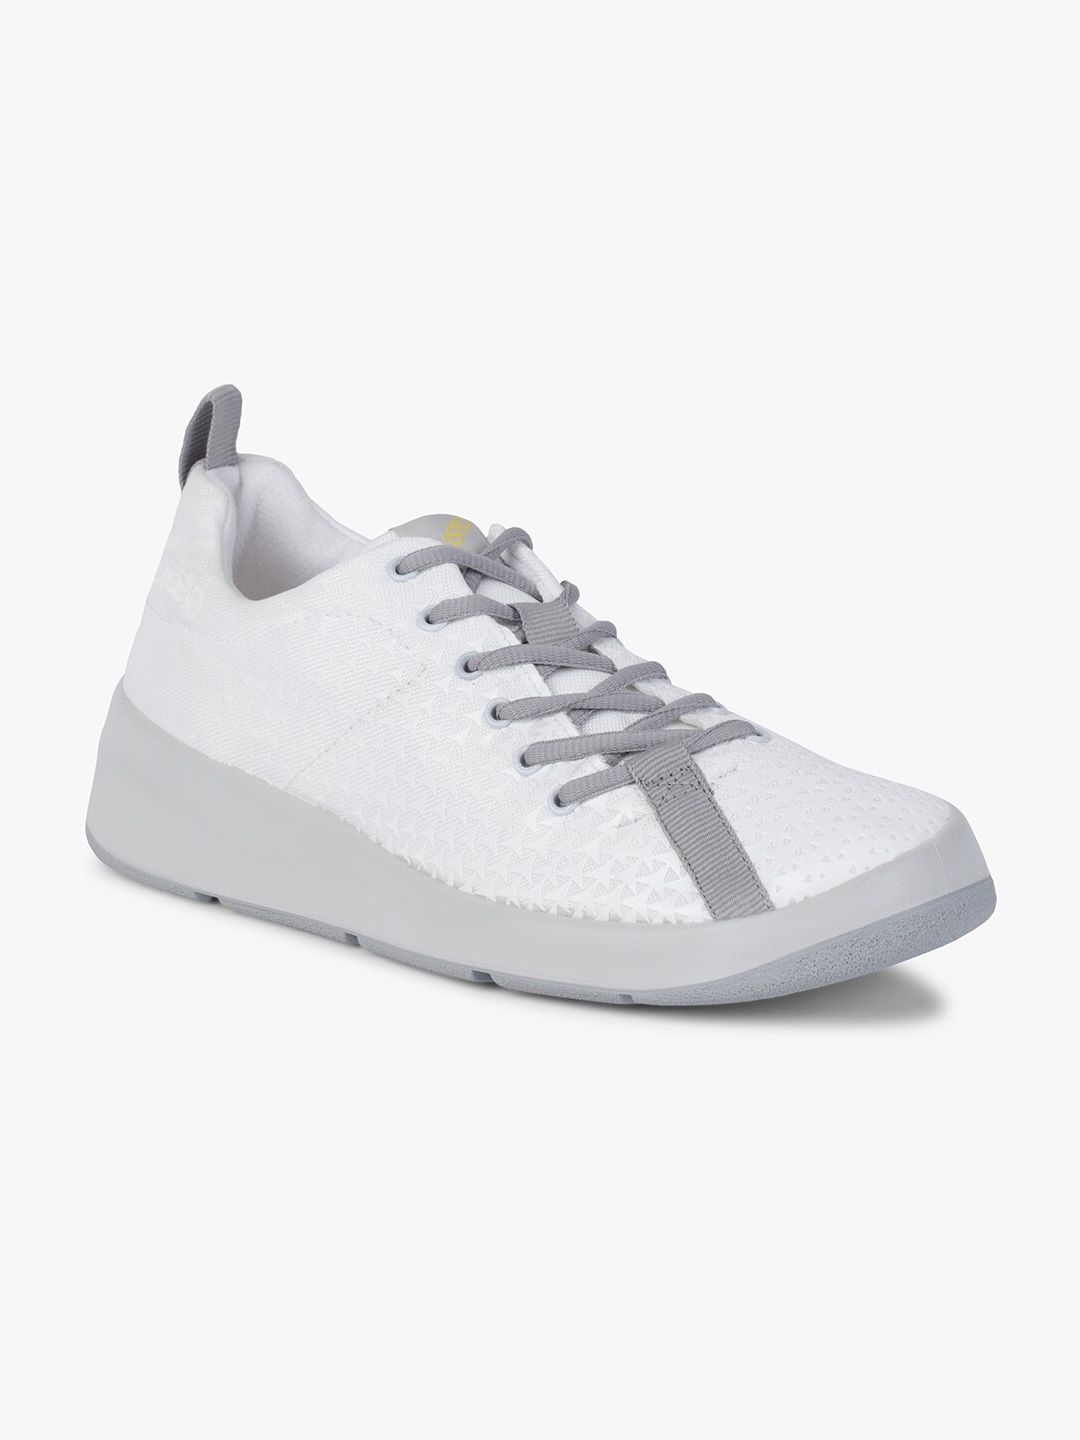 plaeto Unisex Off White & Grey Sneakers Price in India